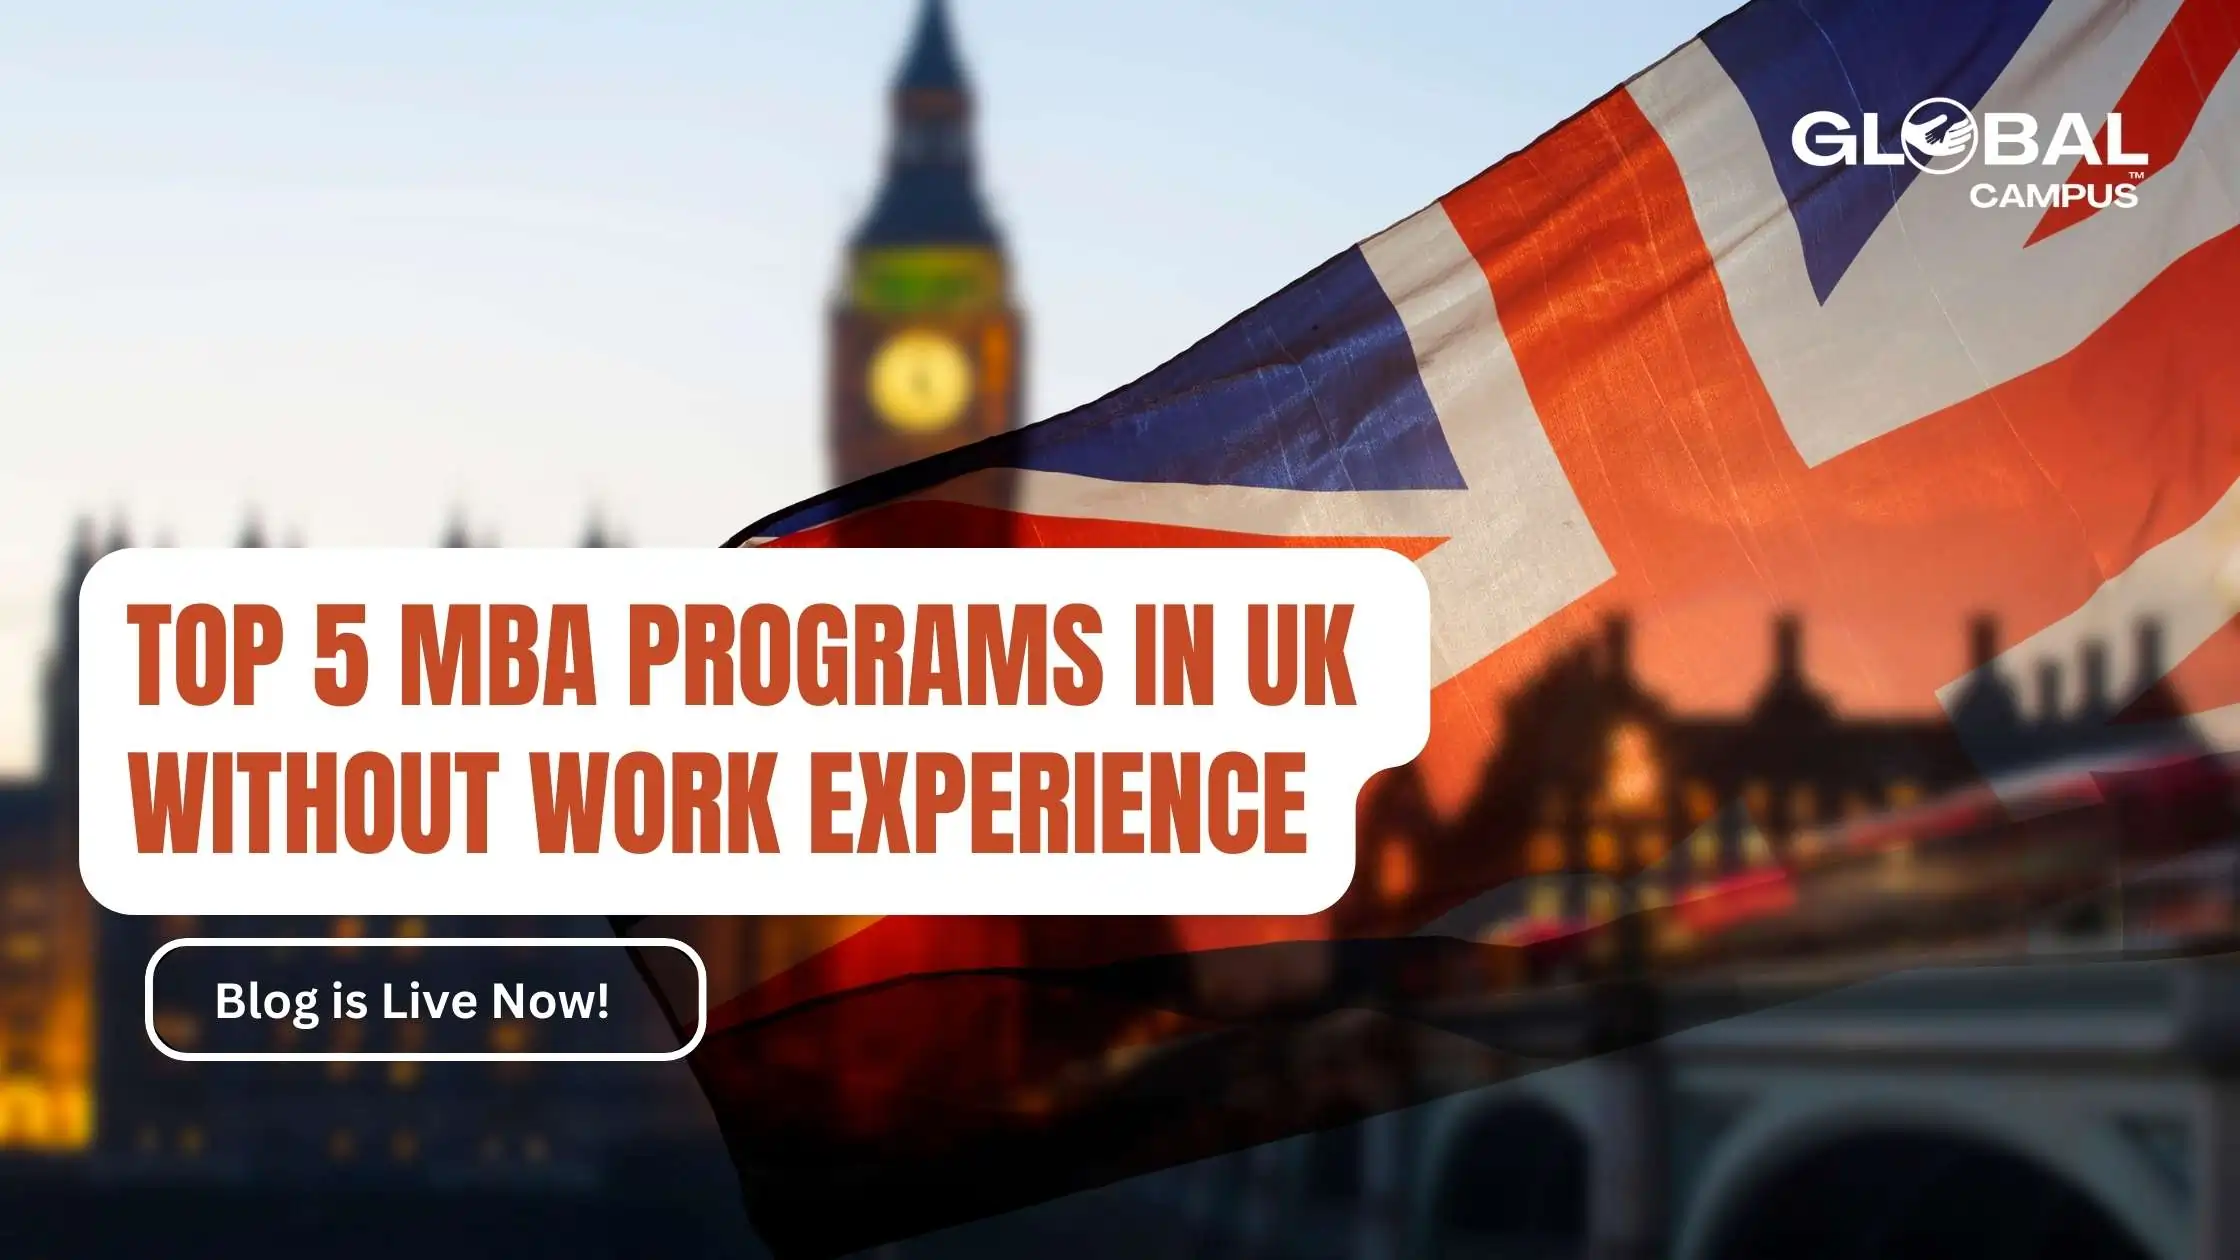 UK flag in the background and a banner that mentions "Study MBA in the UK Without Work Experience."